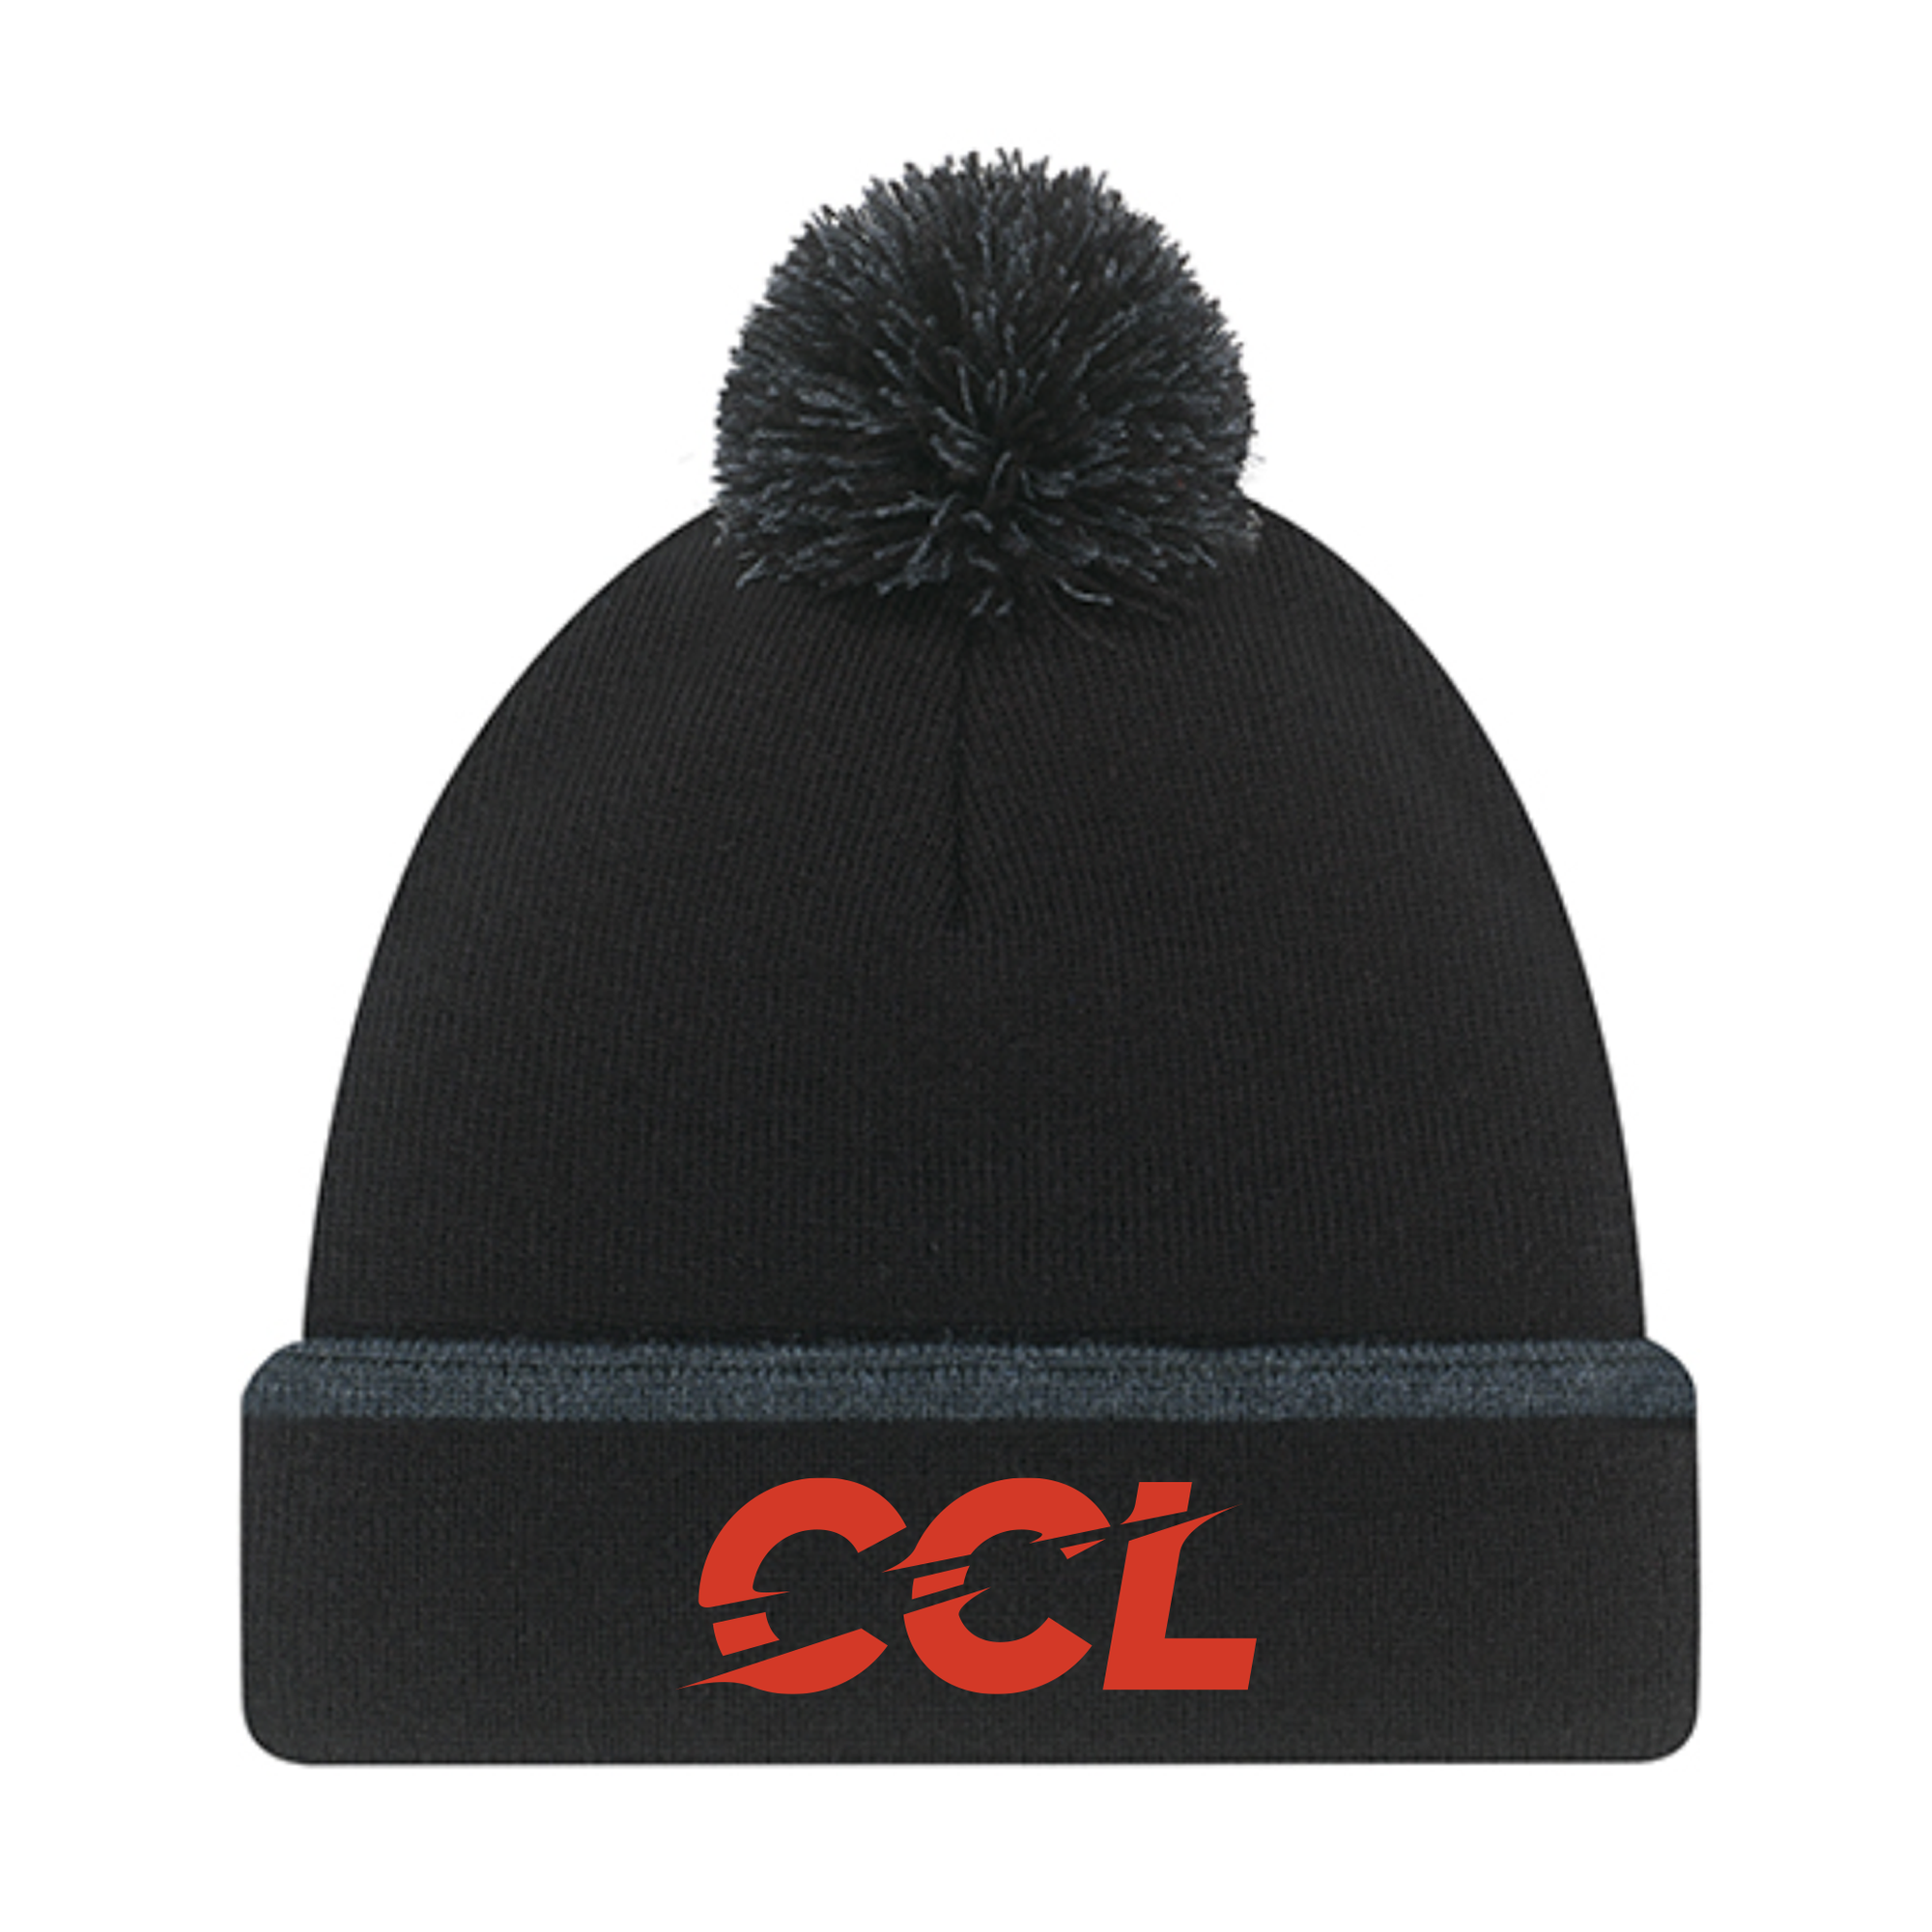 Tuque / Hockey CCL